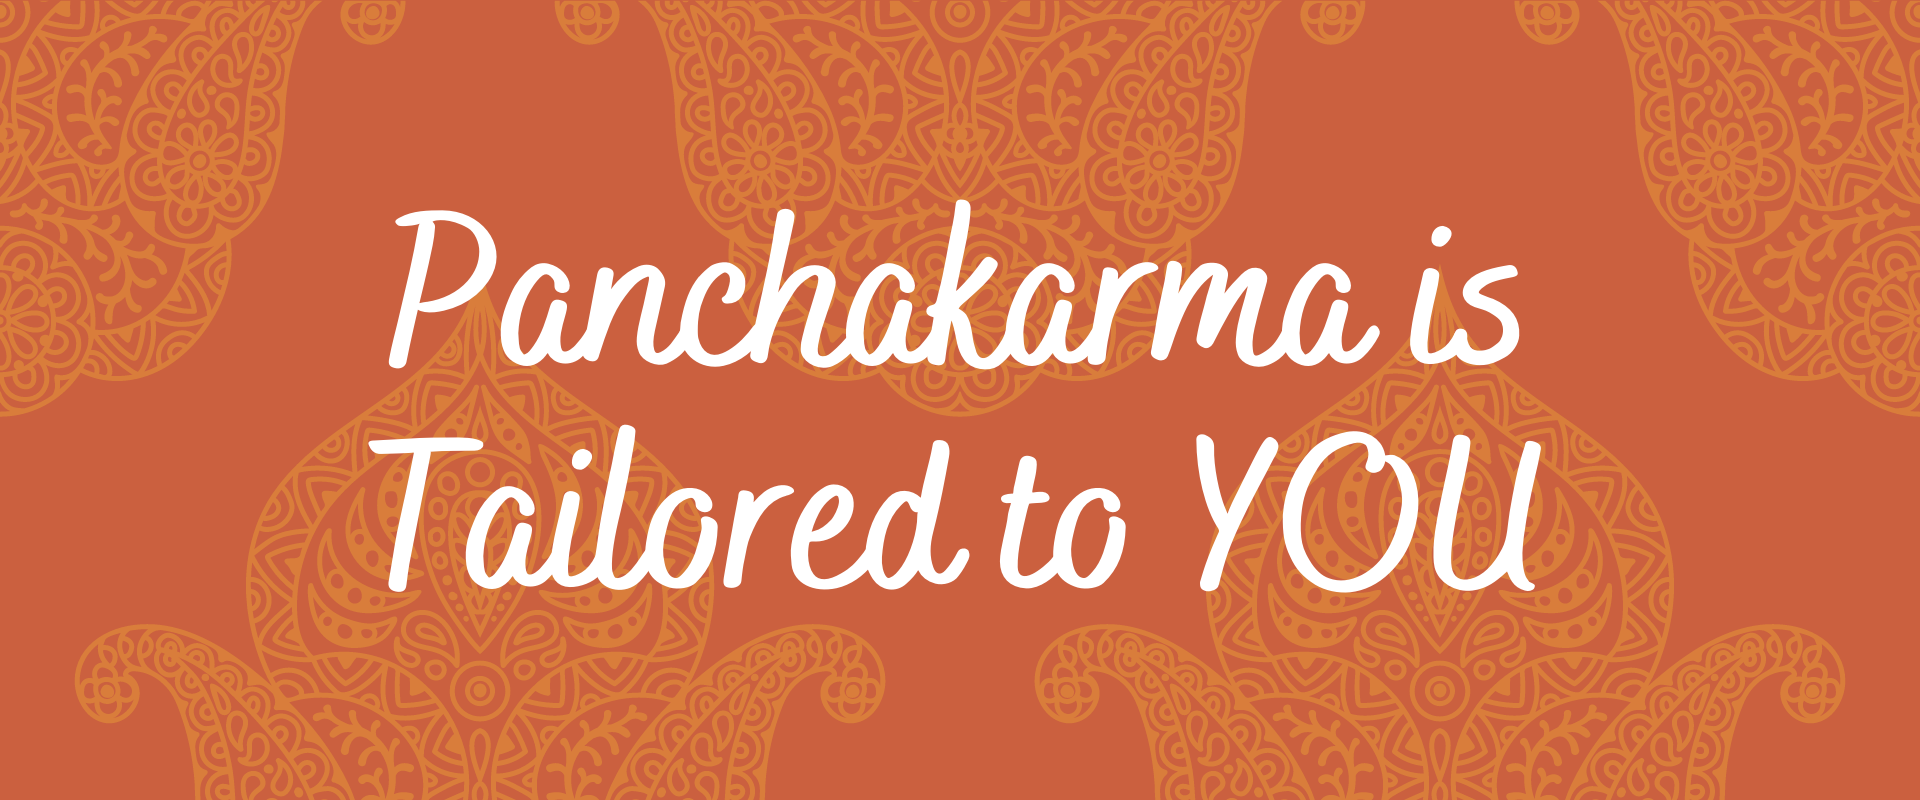 Panchakarma is Tailored to you